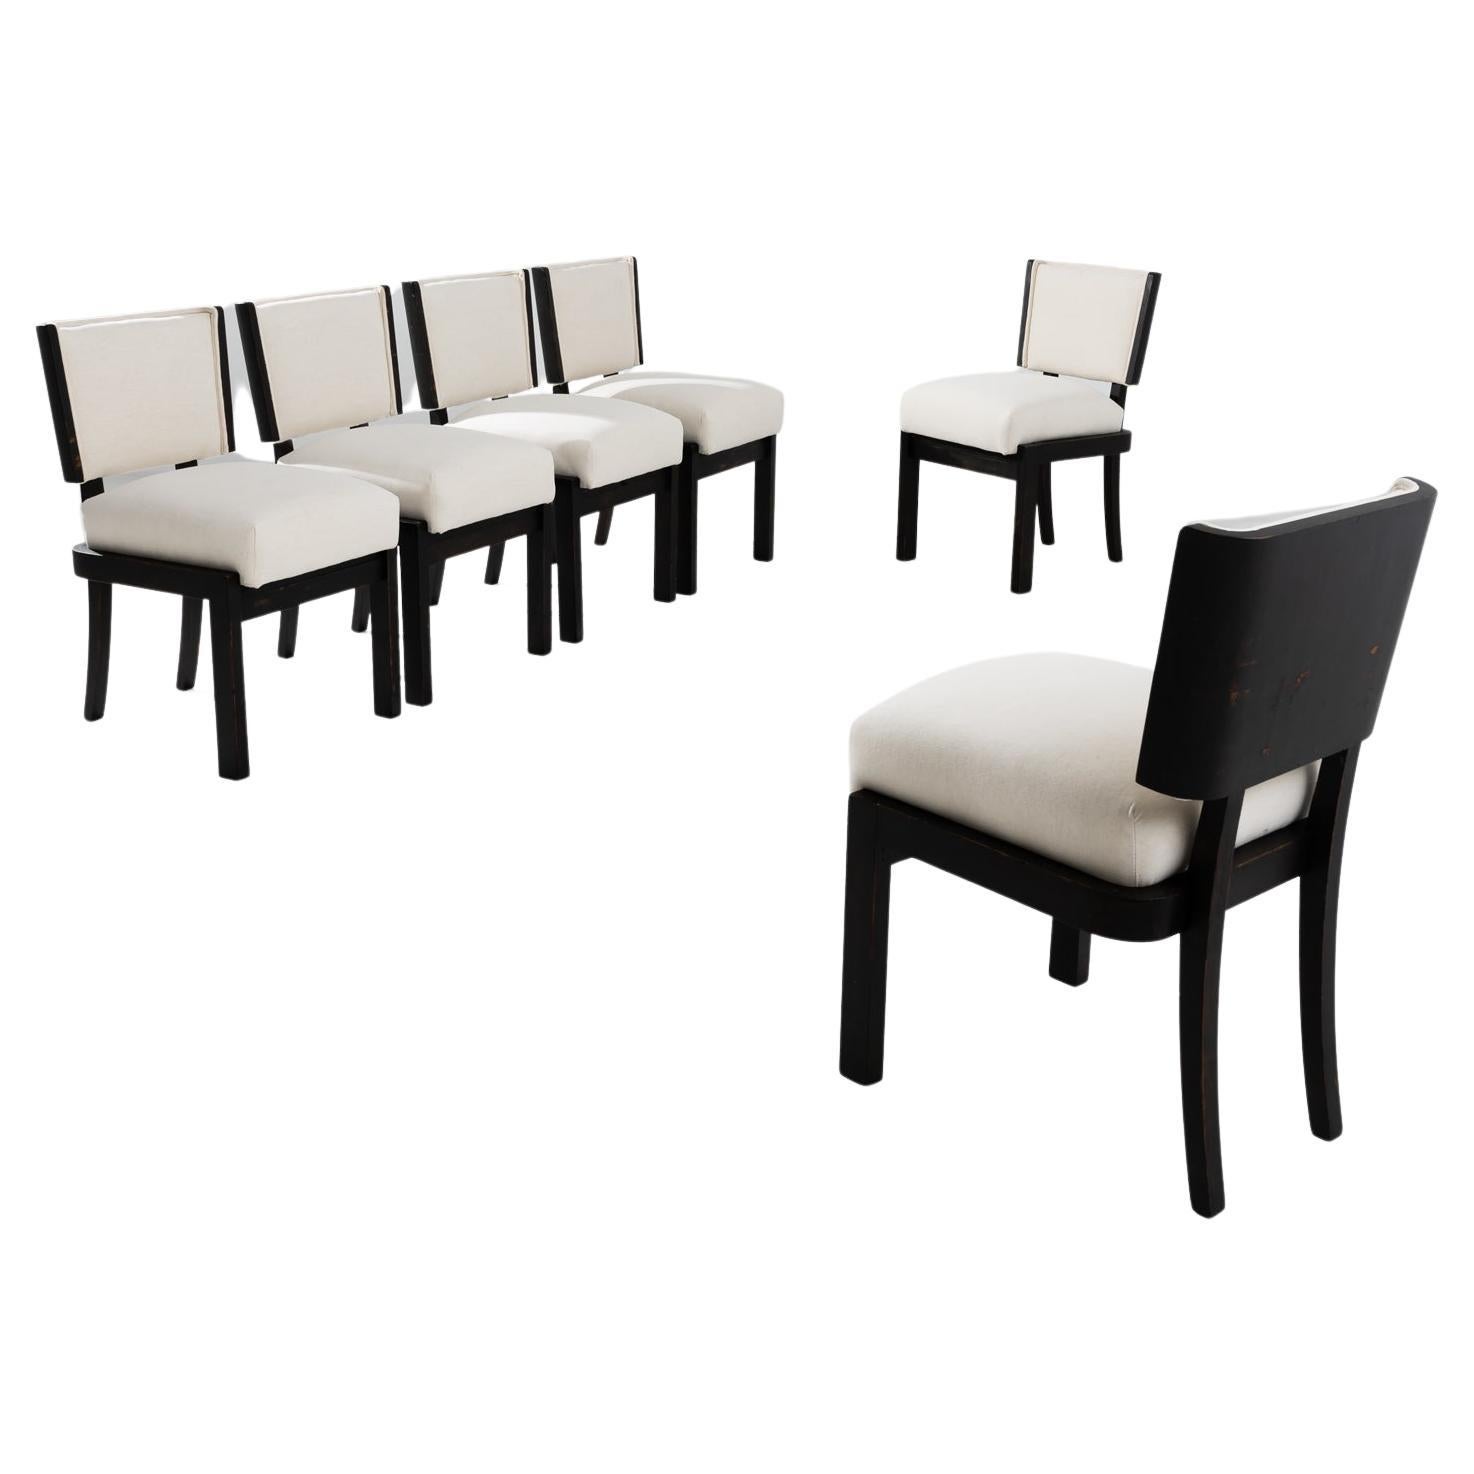 1930s Czech Modern Upholstered Dining Chairs, Set of Six